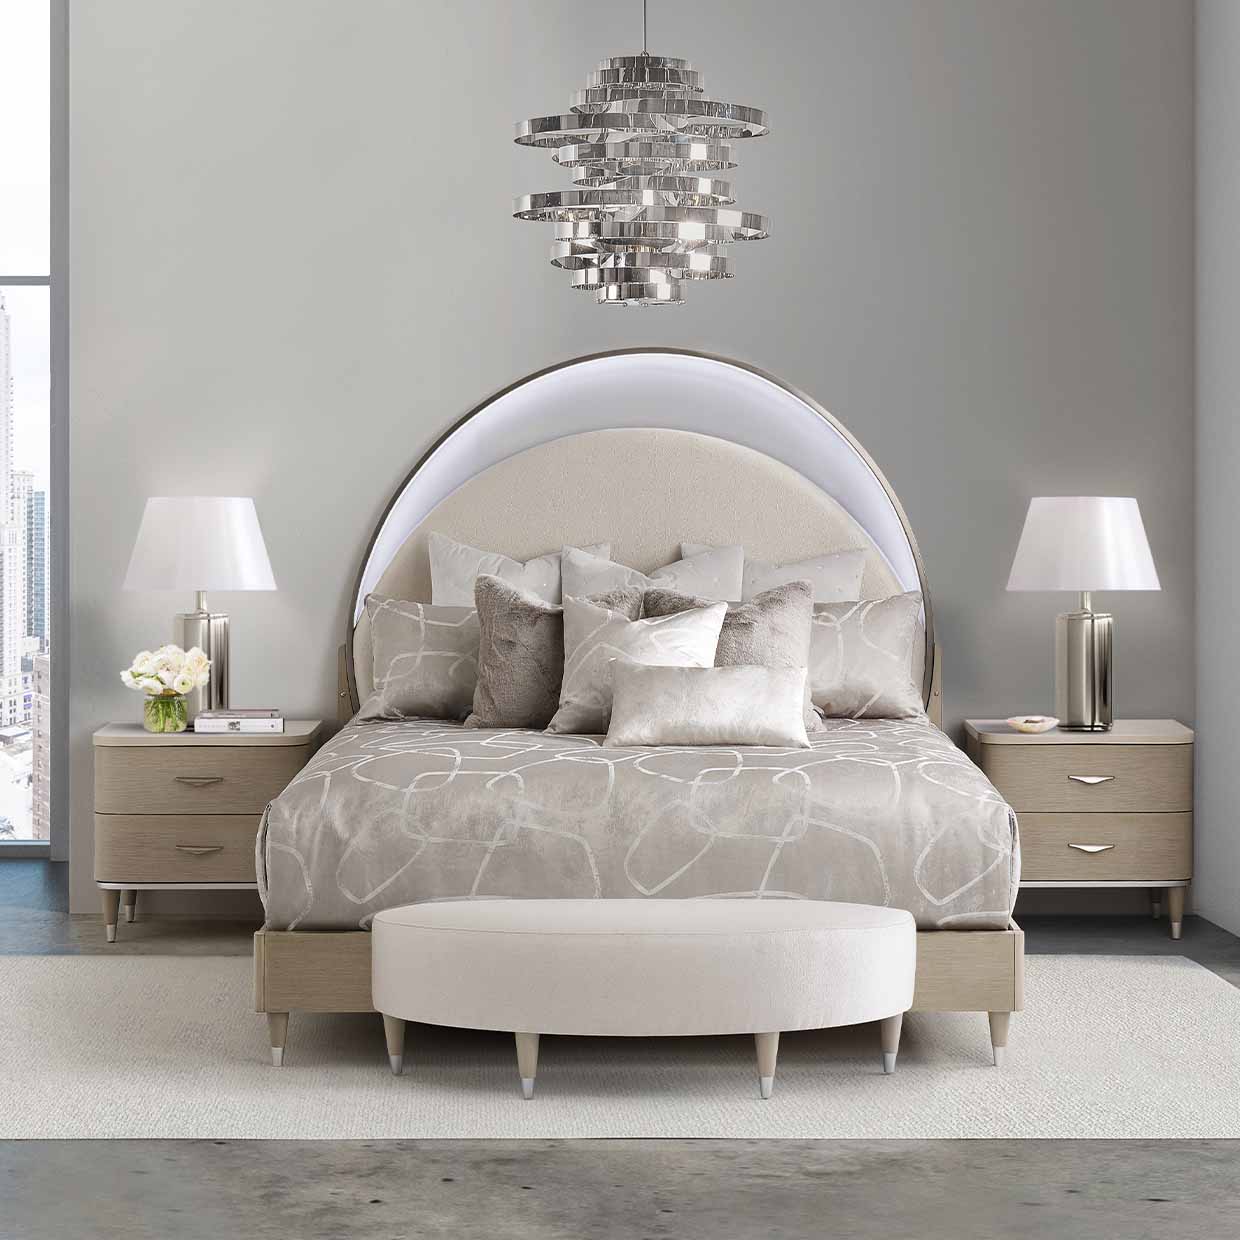 ECLIPSE Cal King Bed W/ Lights - Dream art Gallery